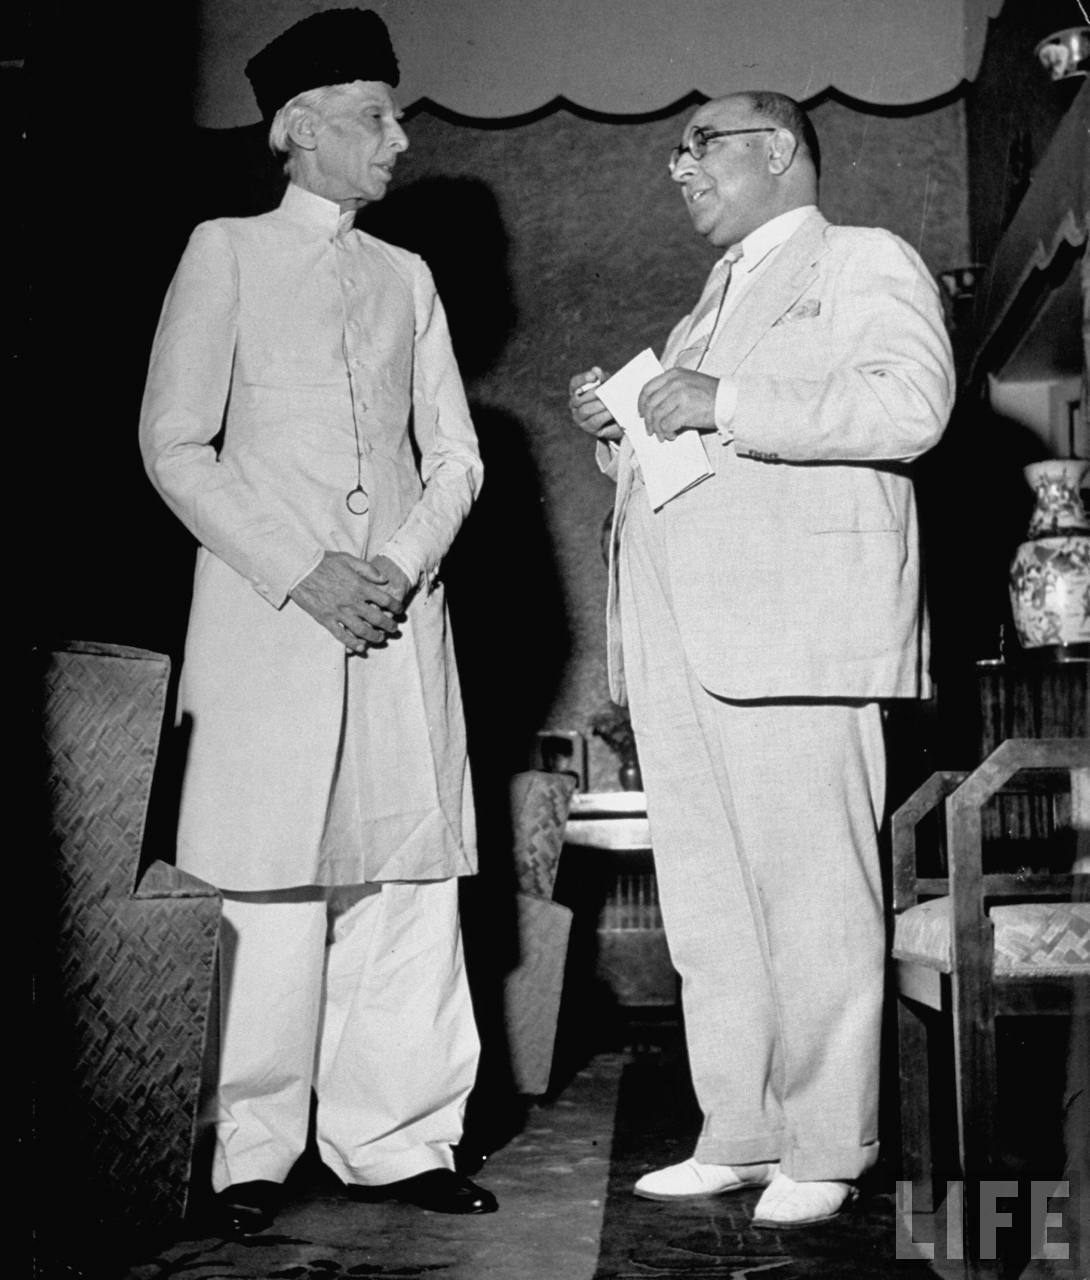 Mohammed Ali Jinnah, President of India's Moslem League in conversation with Nawazawa Liaquad Ali Khan at a political meeting - New Delhi May 1946